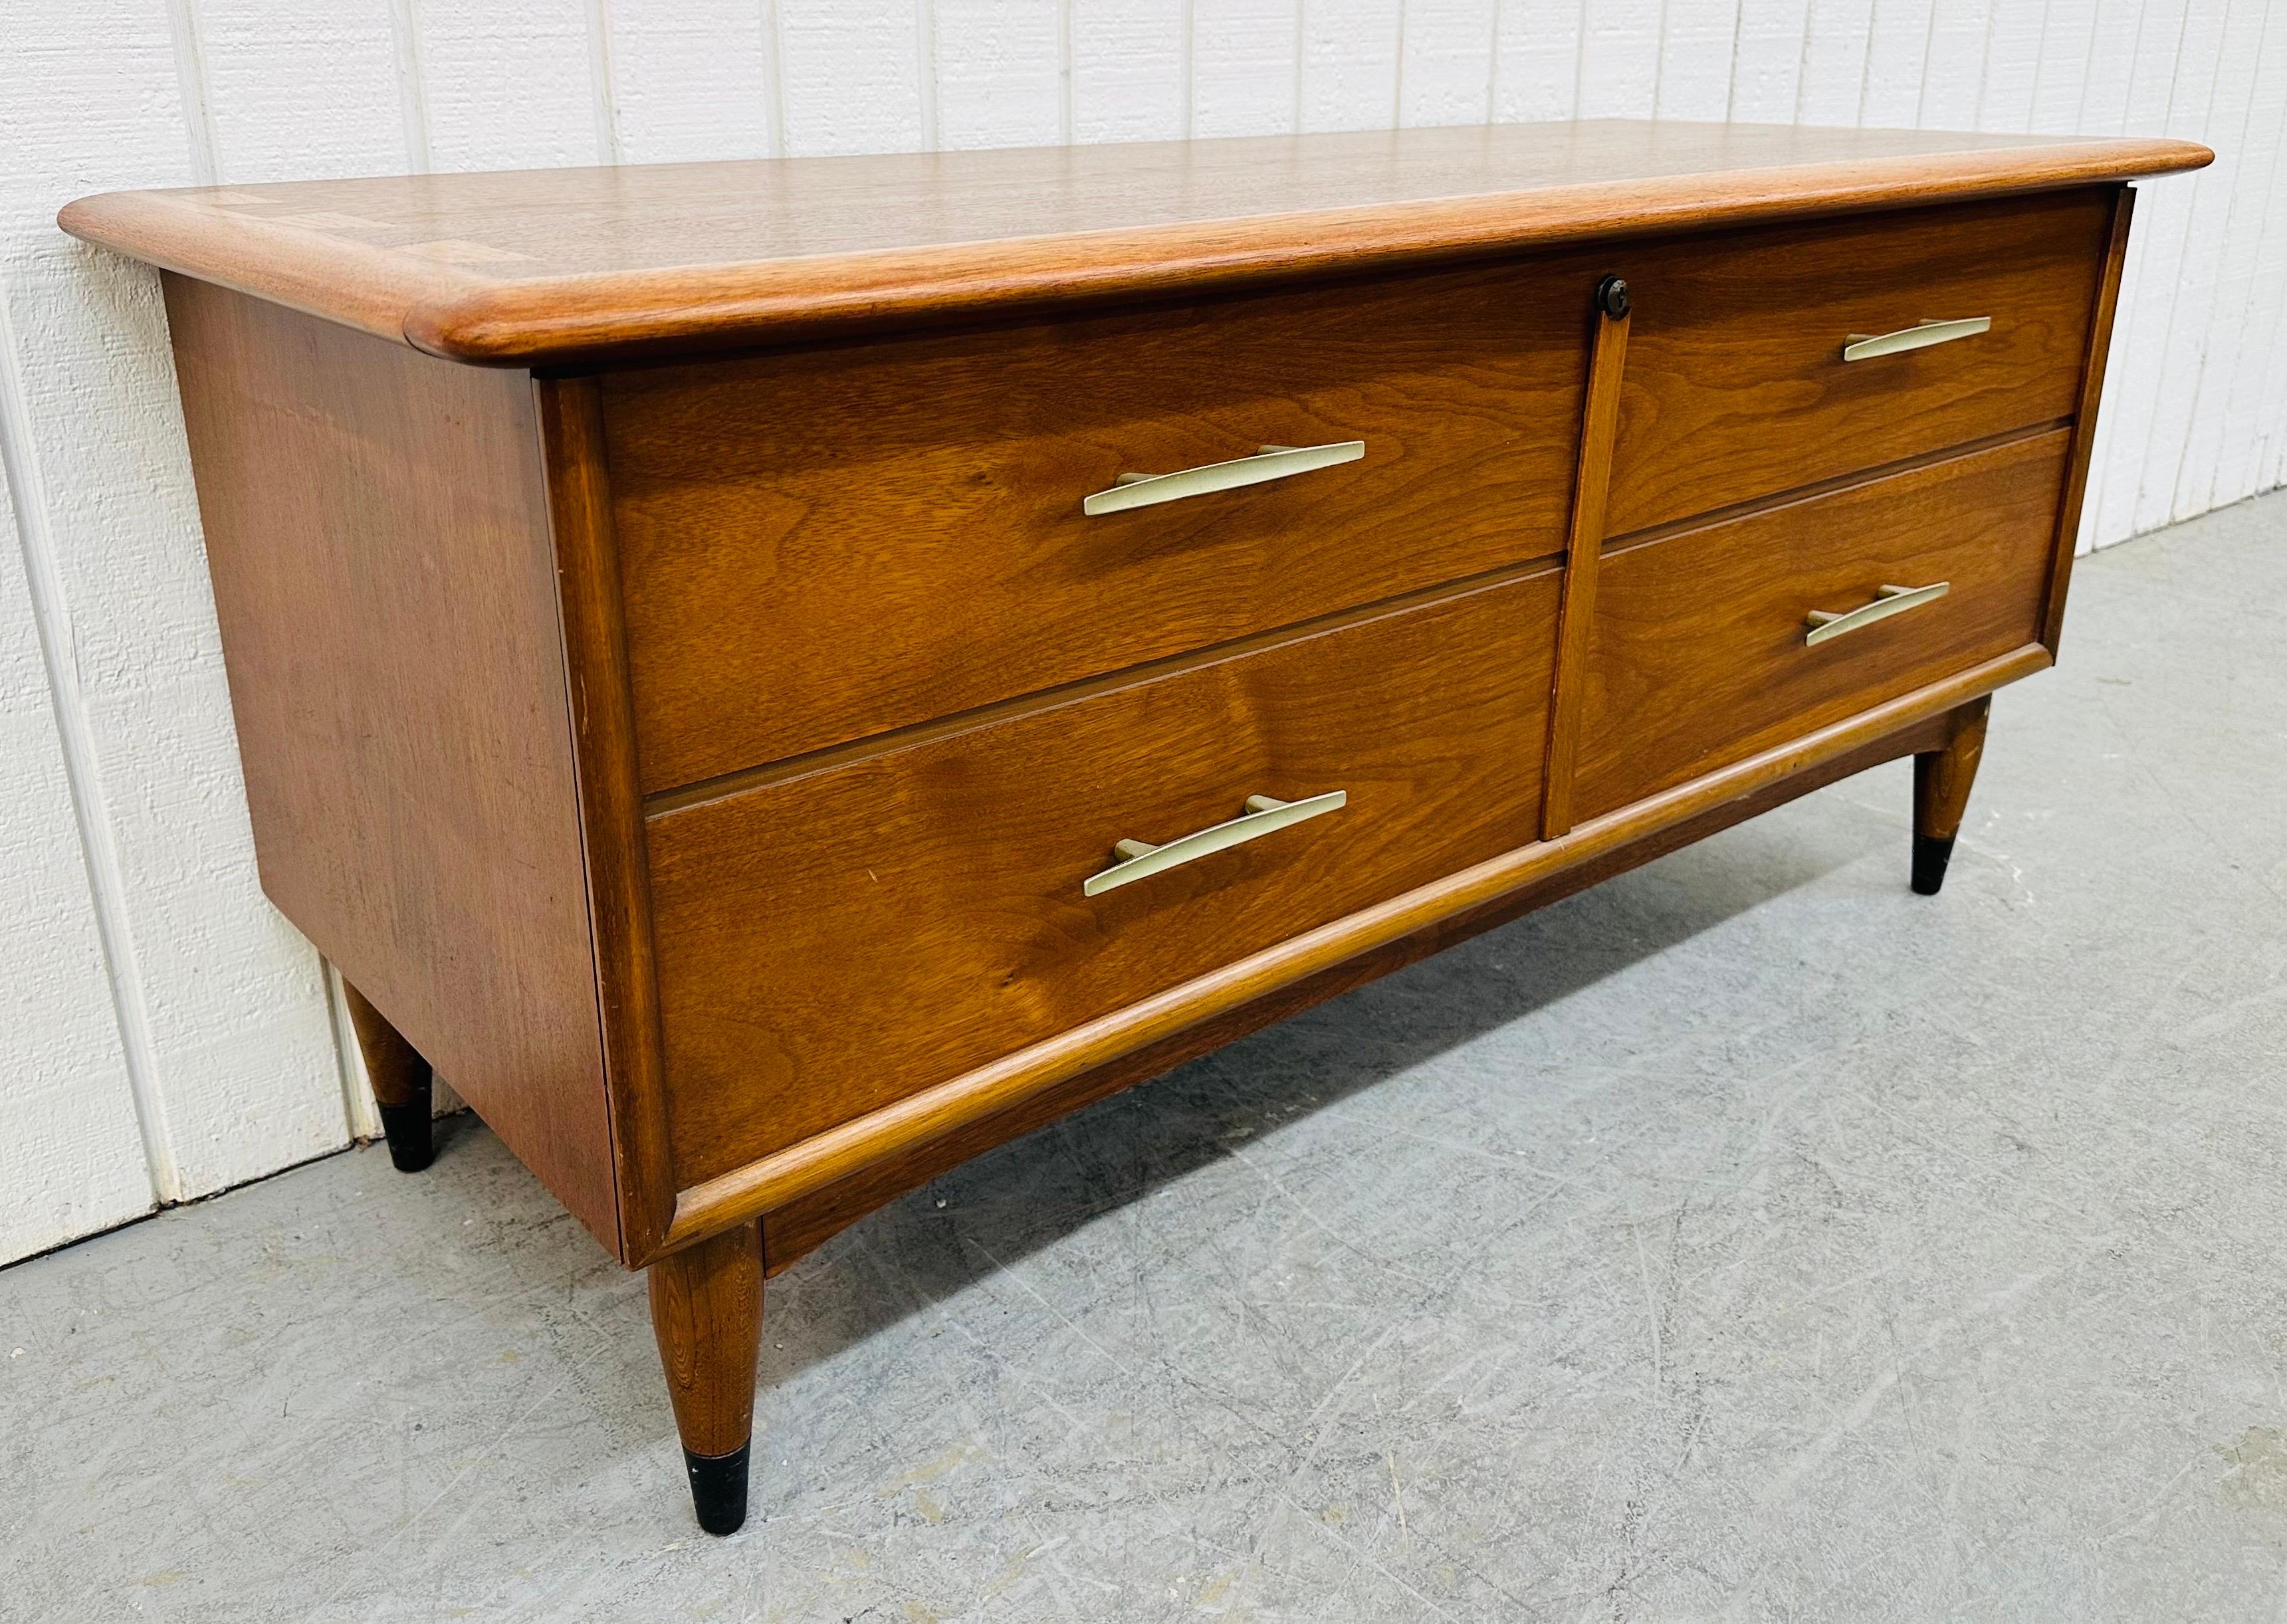 This listing is for a Mid-Century Modern Lane Acclaimed Walnut Cedar Chest. Featuring a straight line design, classic Lane Acclaimed dovetailed top, chrome hardware, cedar lined interior, original green velvet lined storage tray, and a beautiful